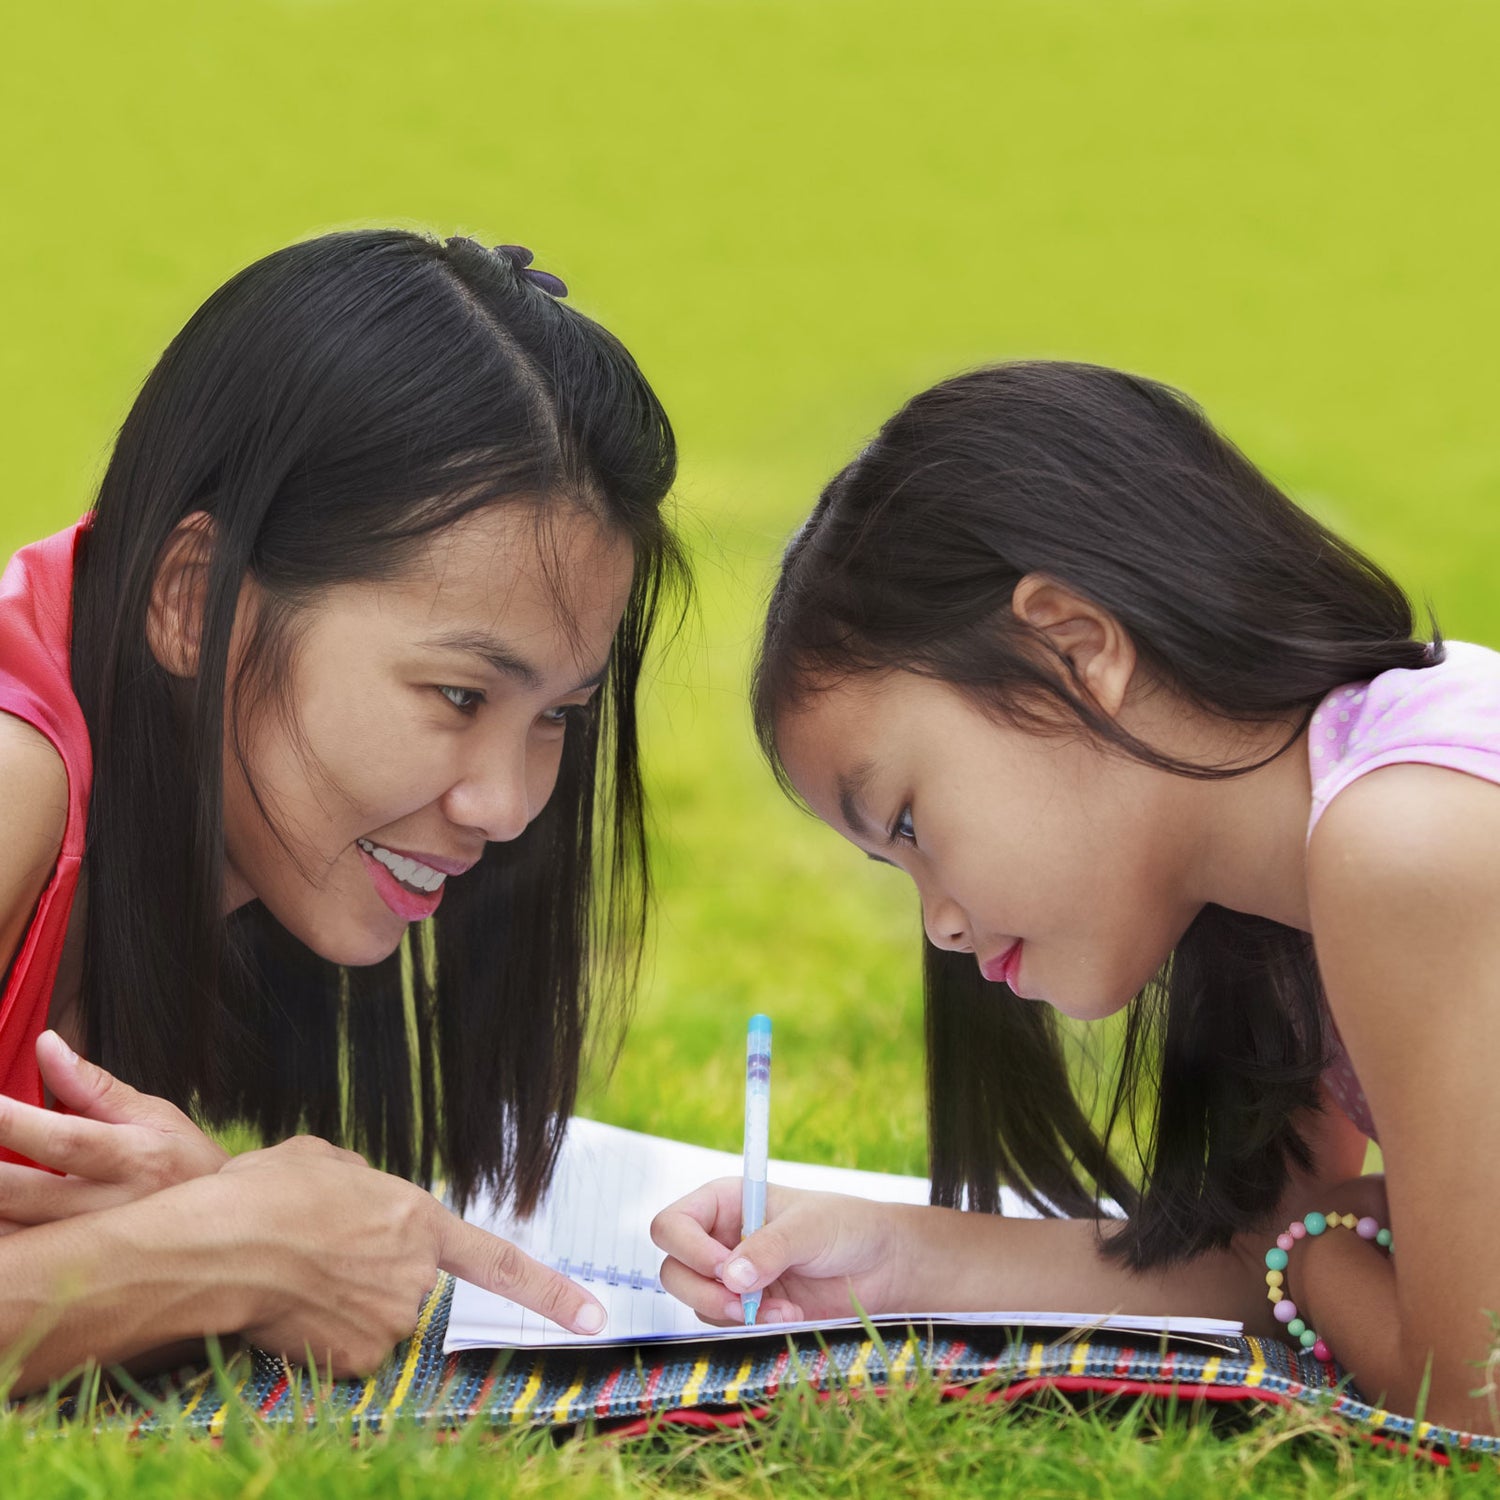 Mother and daughter doing playful math activity outdoors